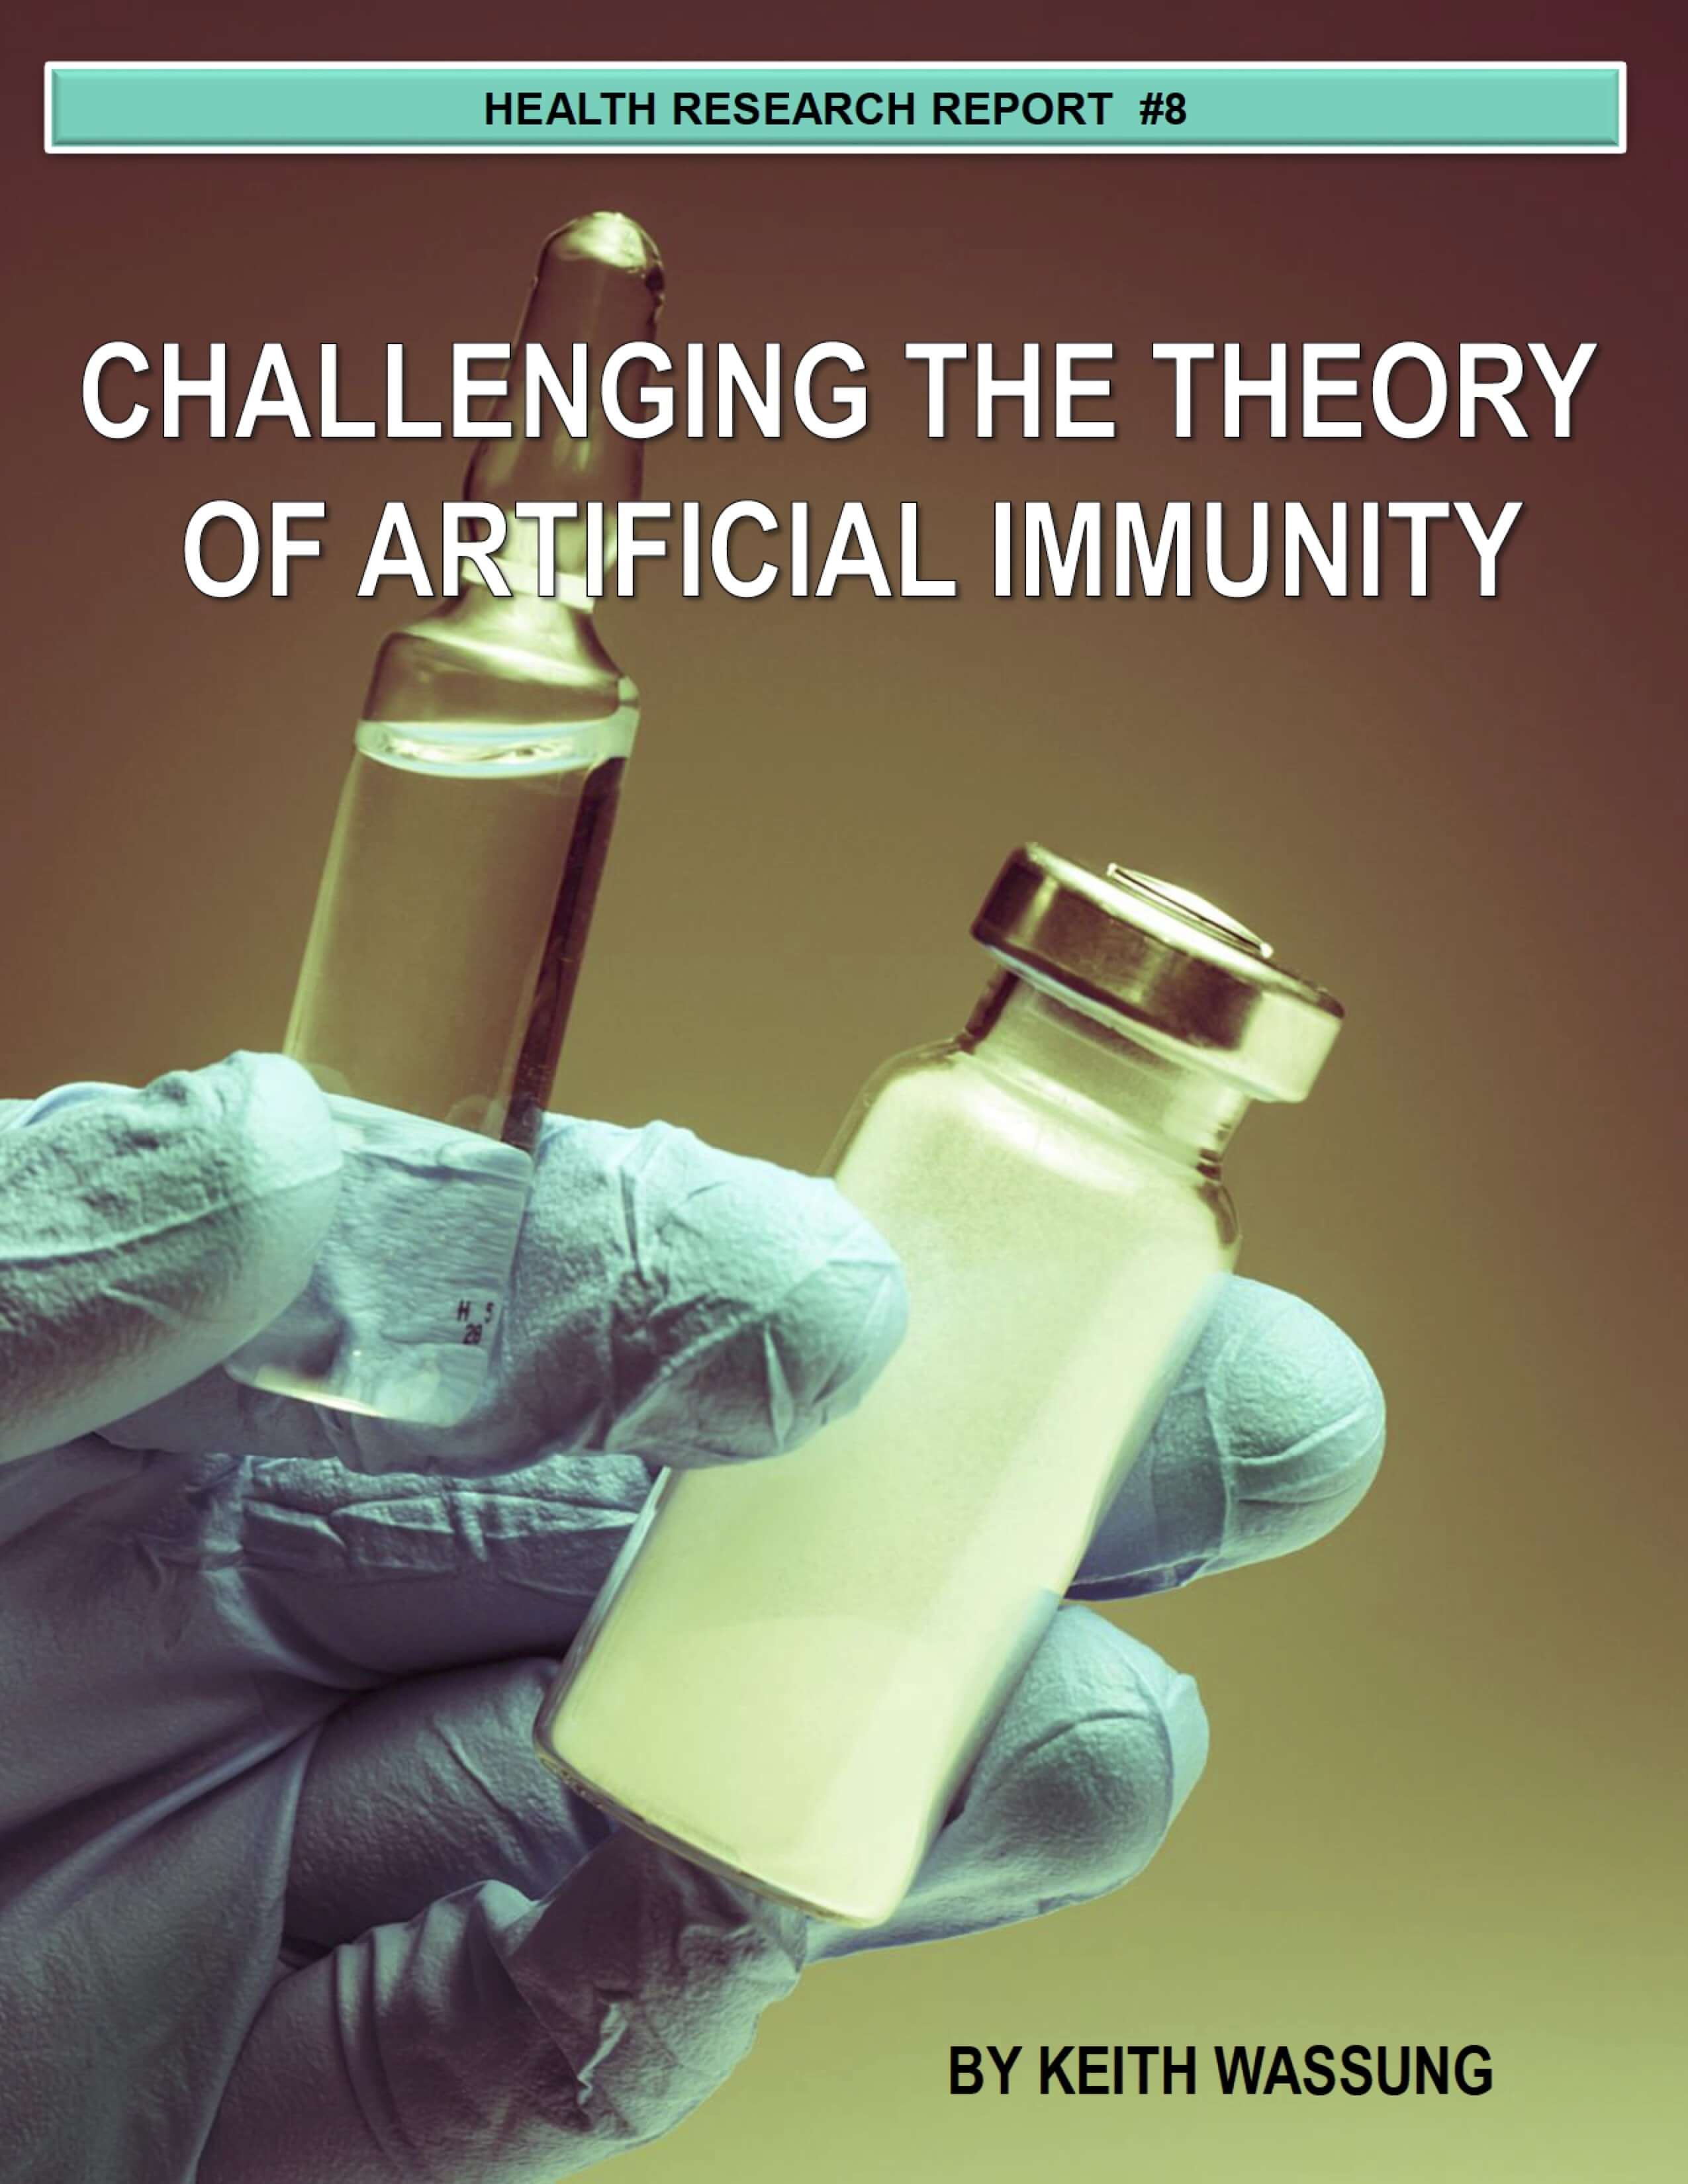 NUCCA Challenging The Theory of Artificial Immunity